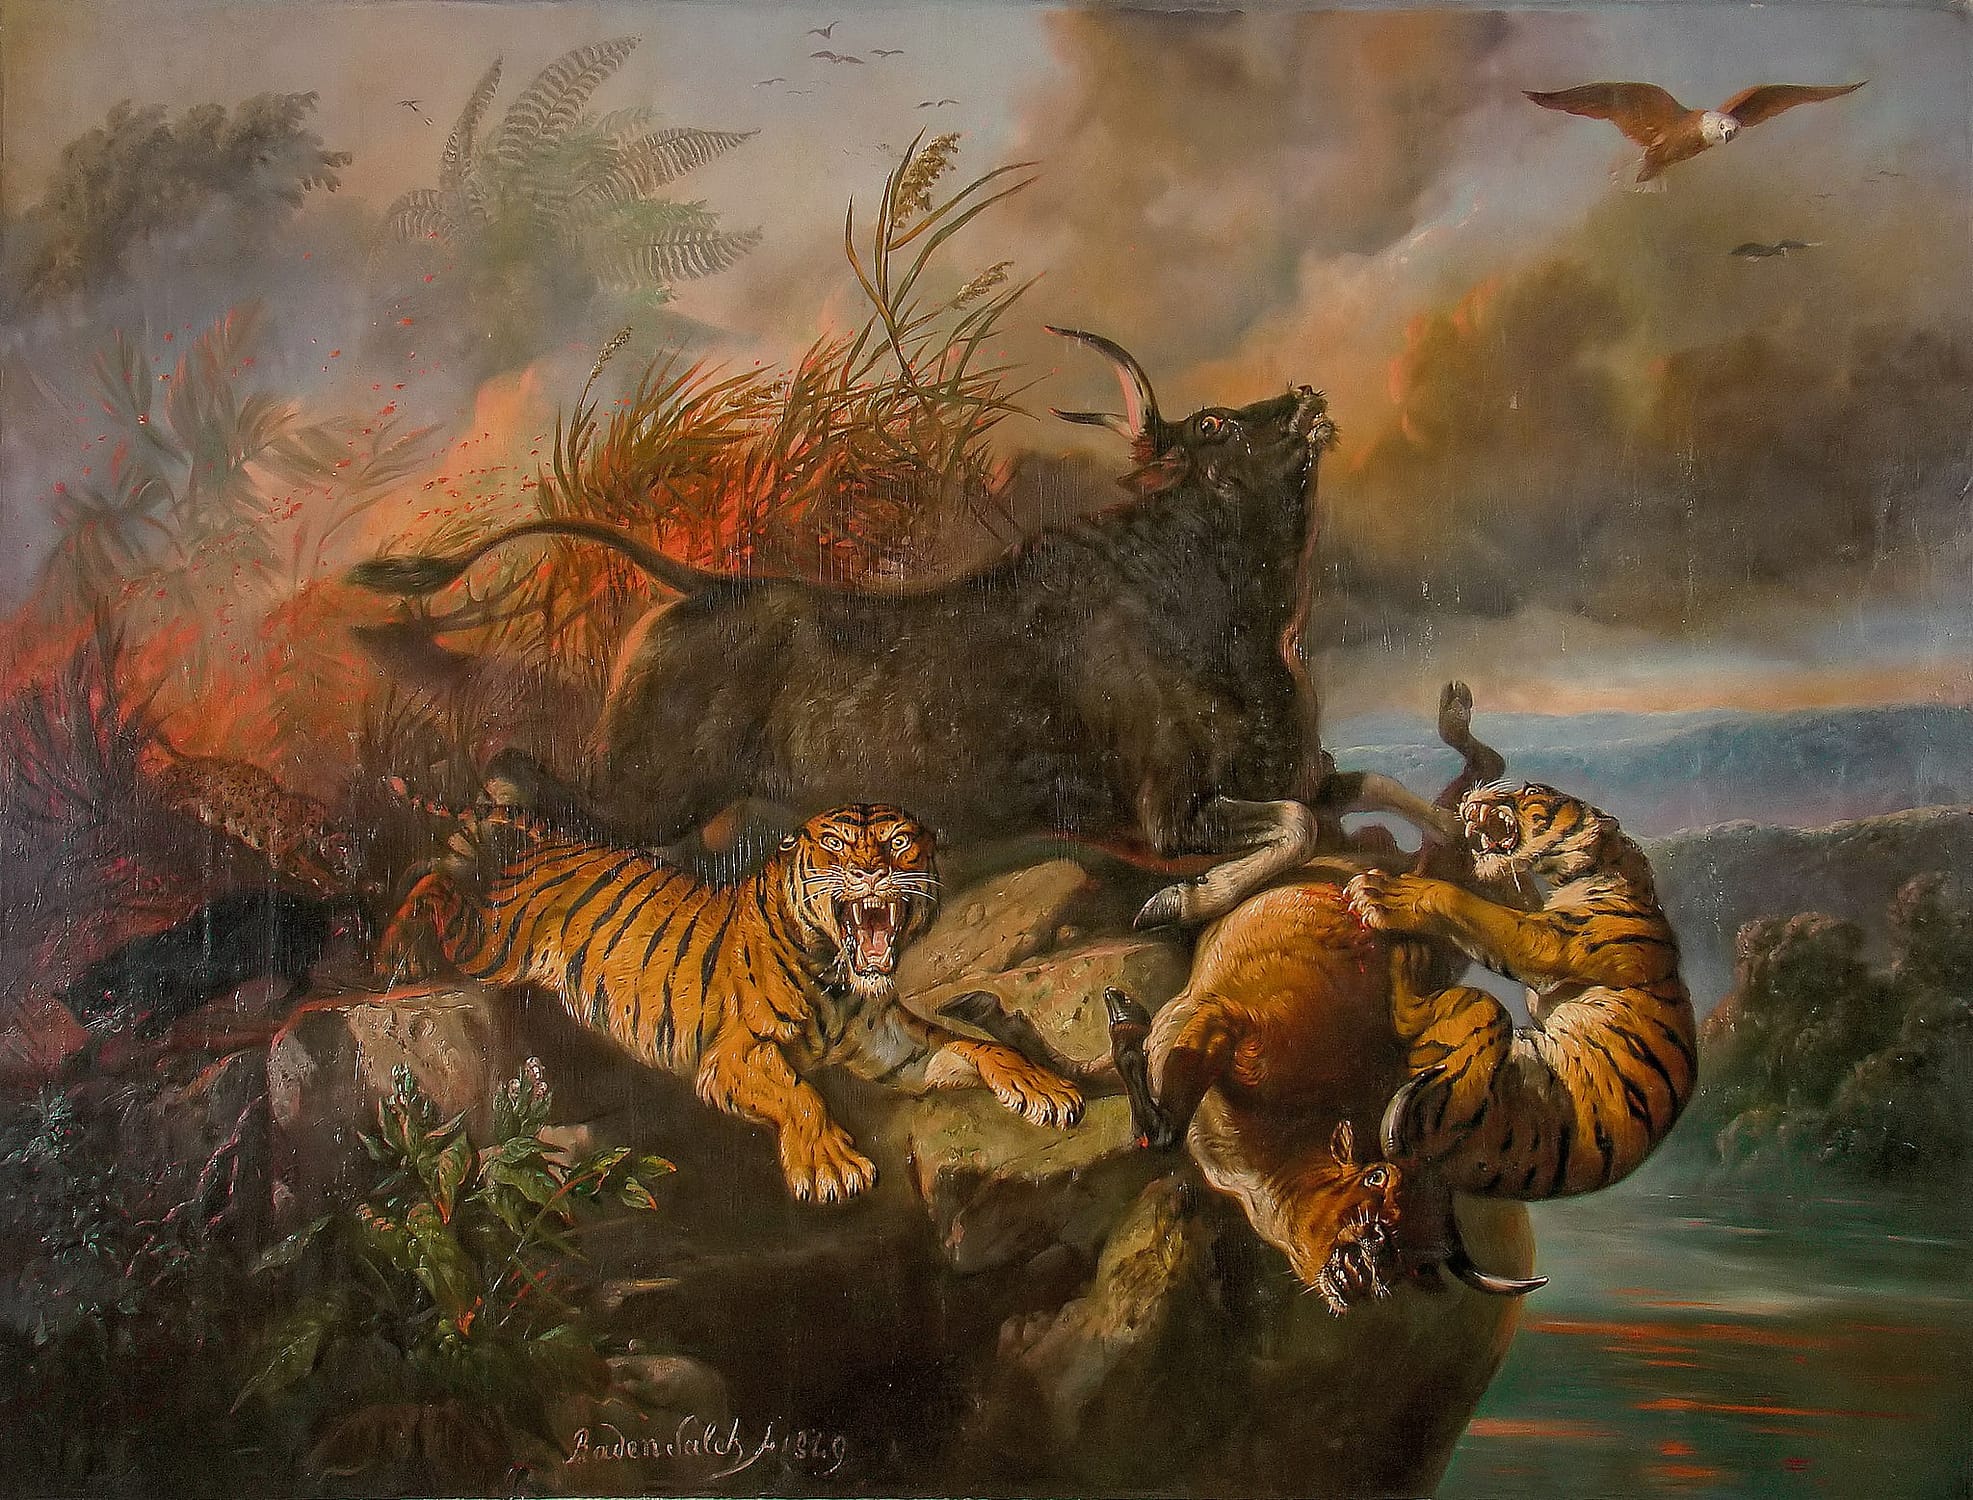 A painting of Forest Fire by Raden Saleh